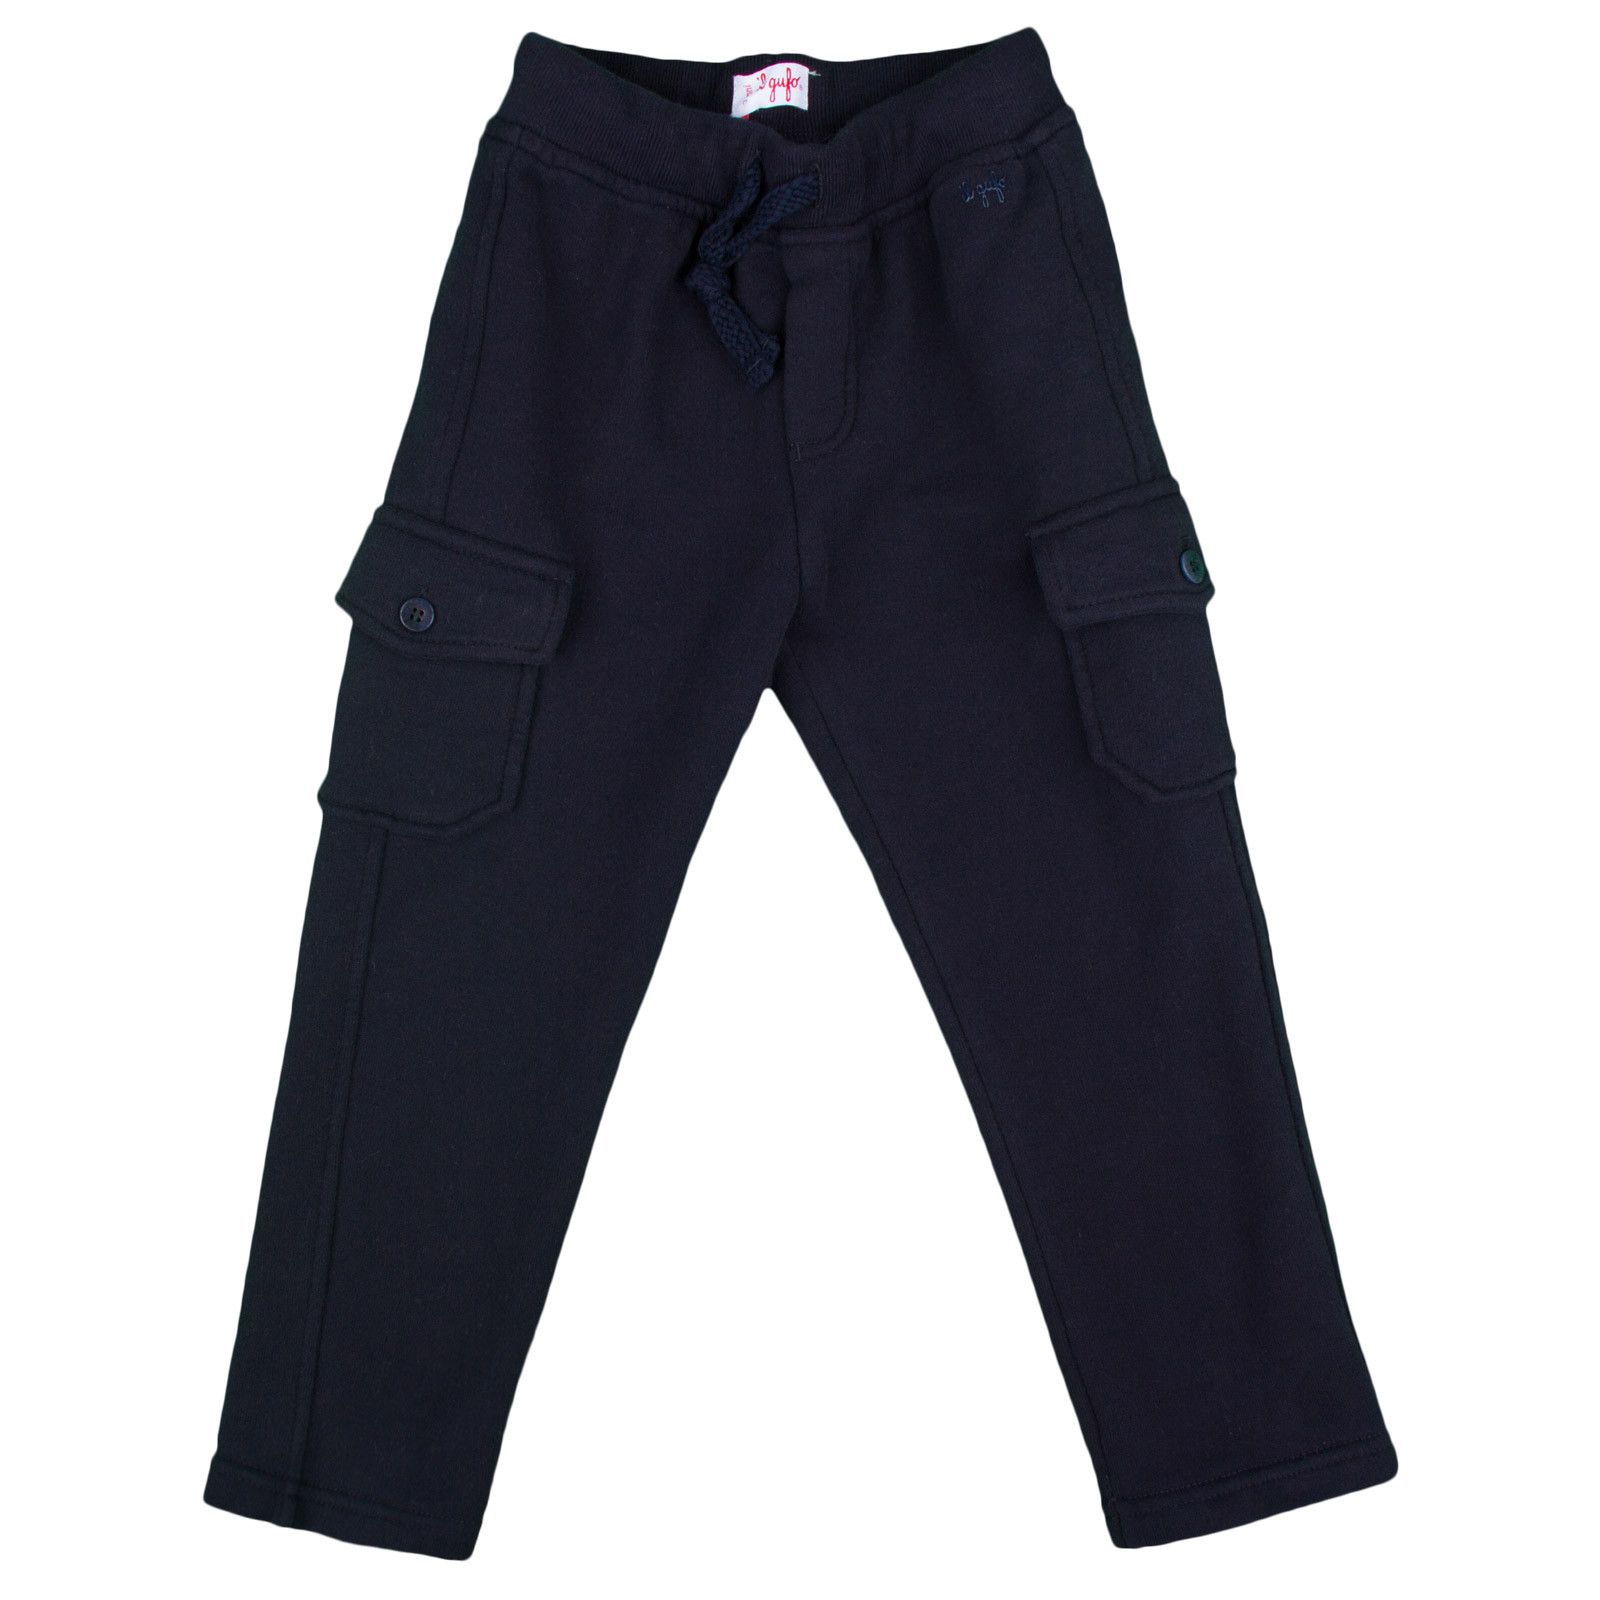 Boys Navy Blue Elastic Waistband Trousers With Pockets - CÉMAROSE | Children's Fashion Store - 1